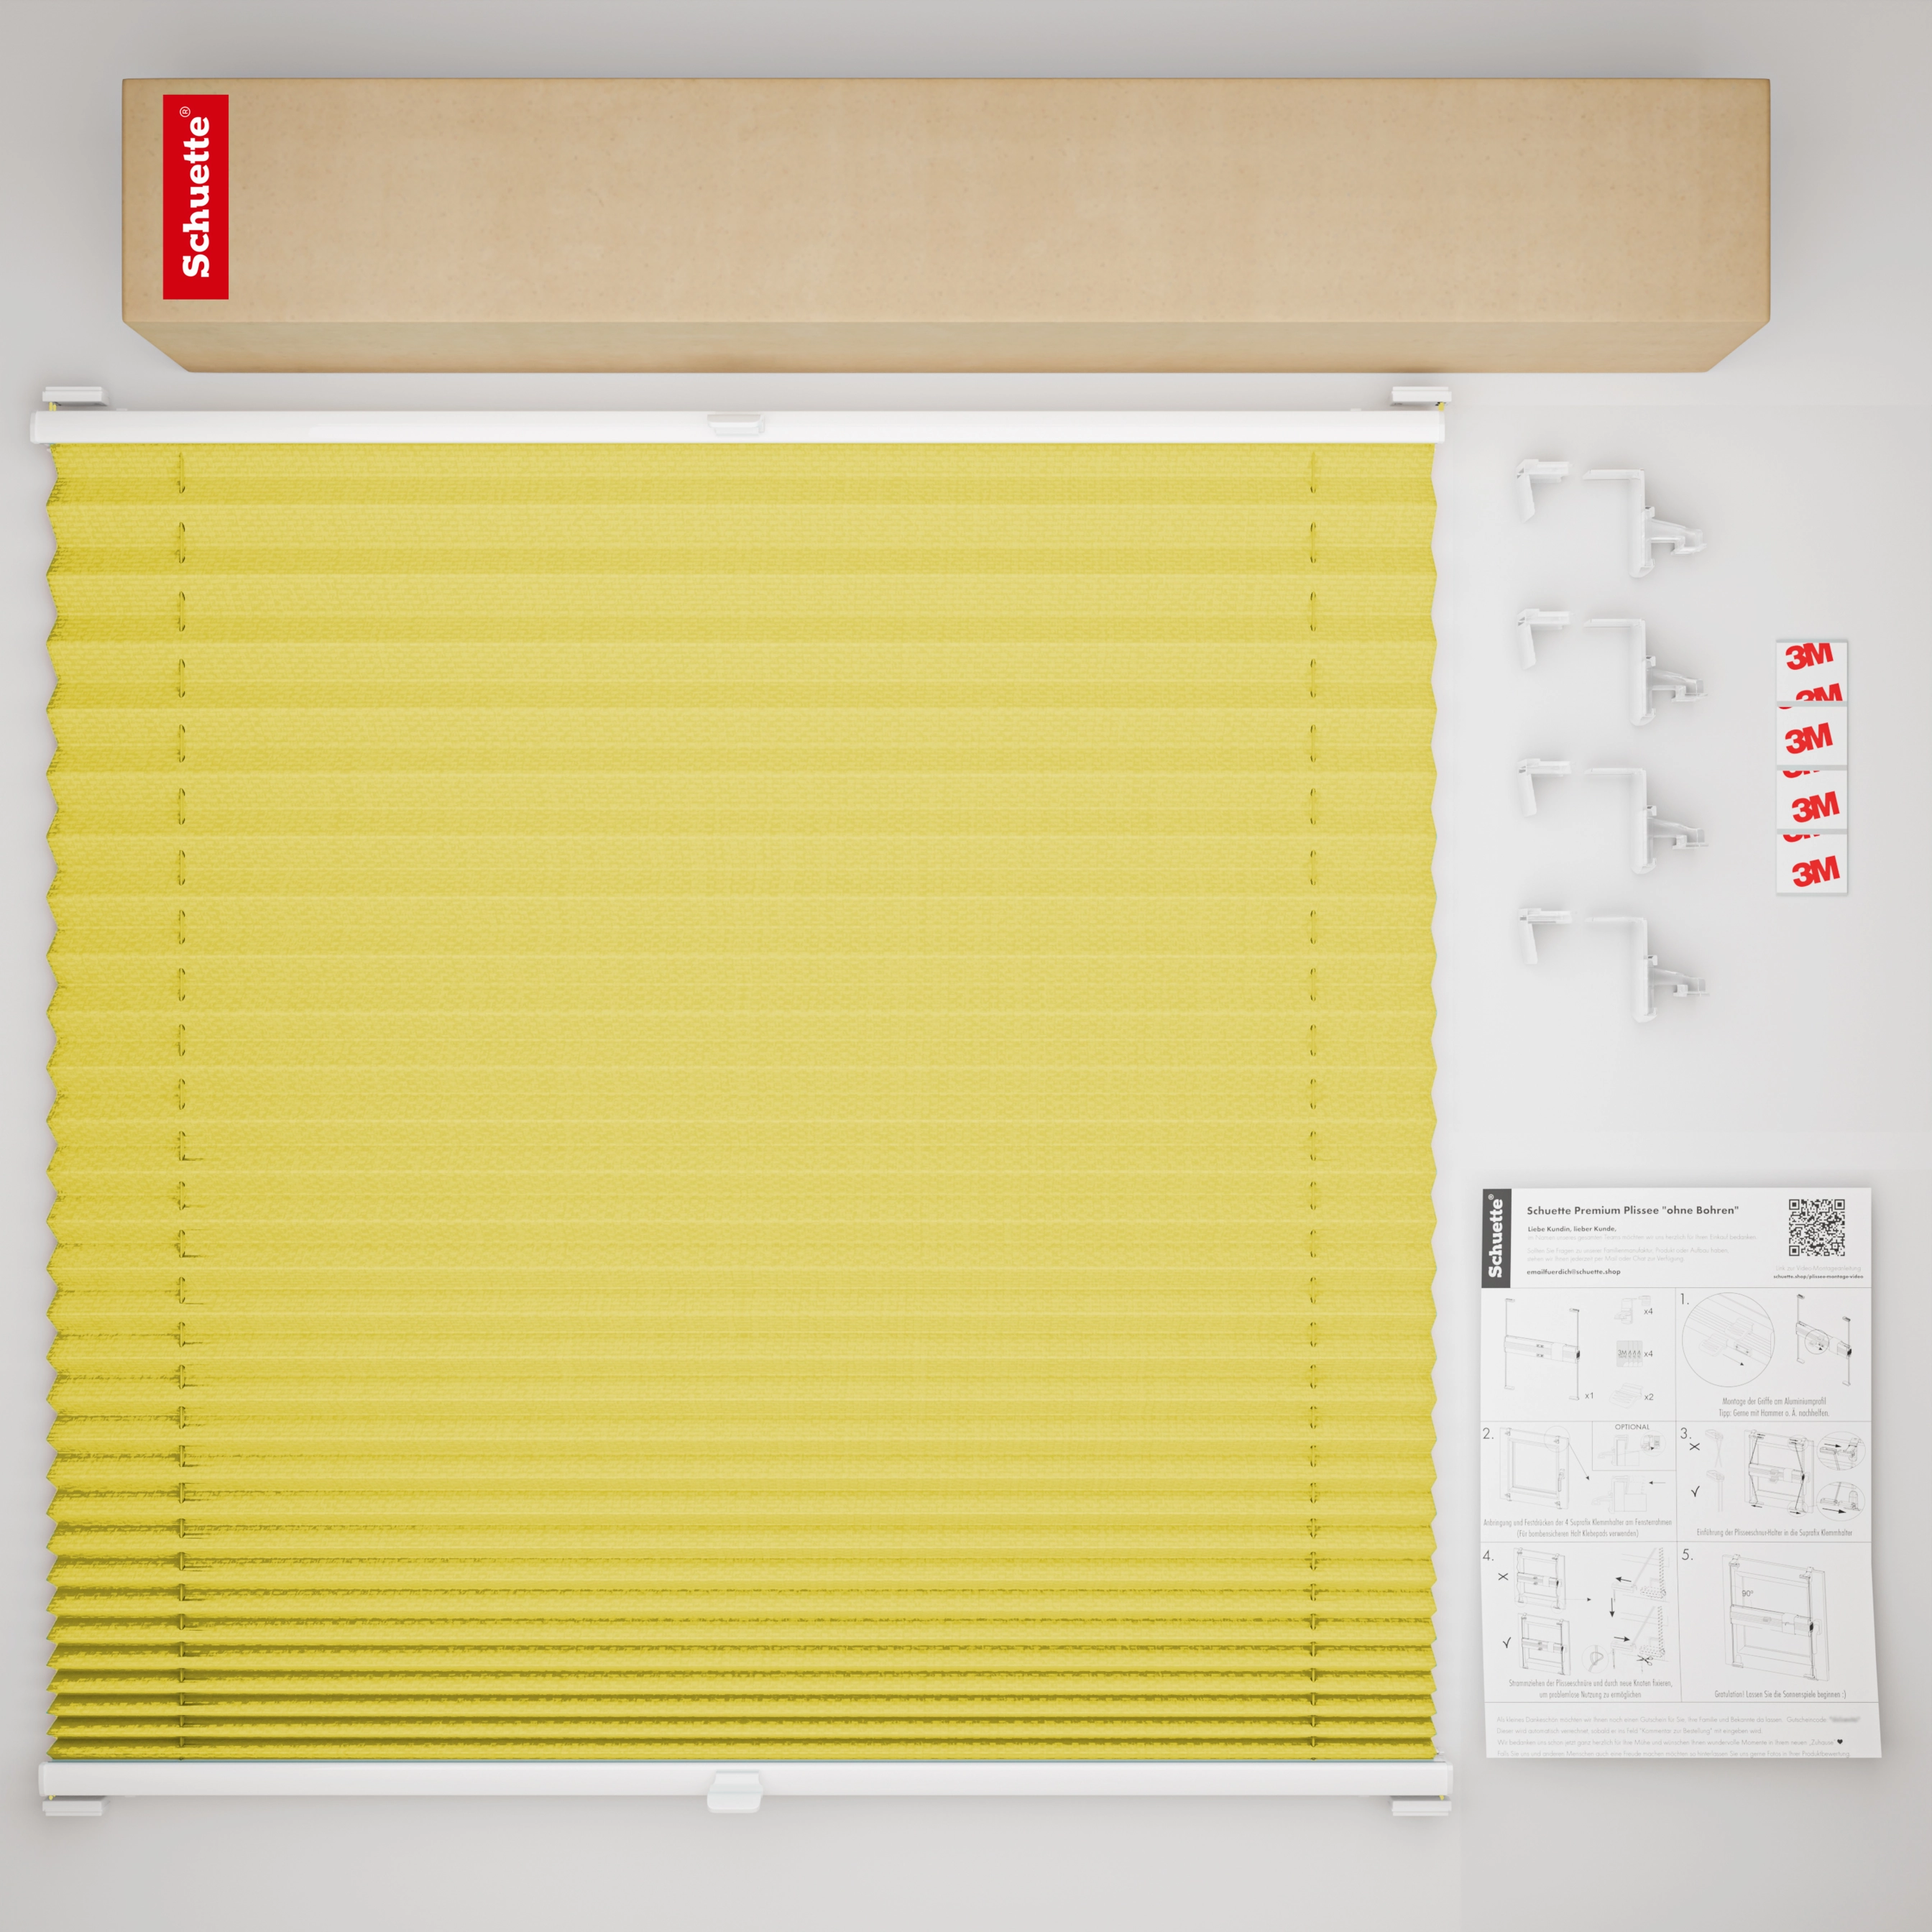 Schuette® Pleated Blind Made to Measure without Drilling • Premium Collection: Summer Time (Yellow) • Profile Color: White